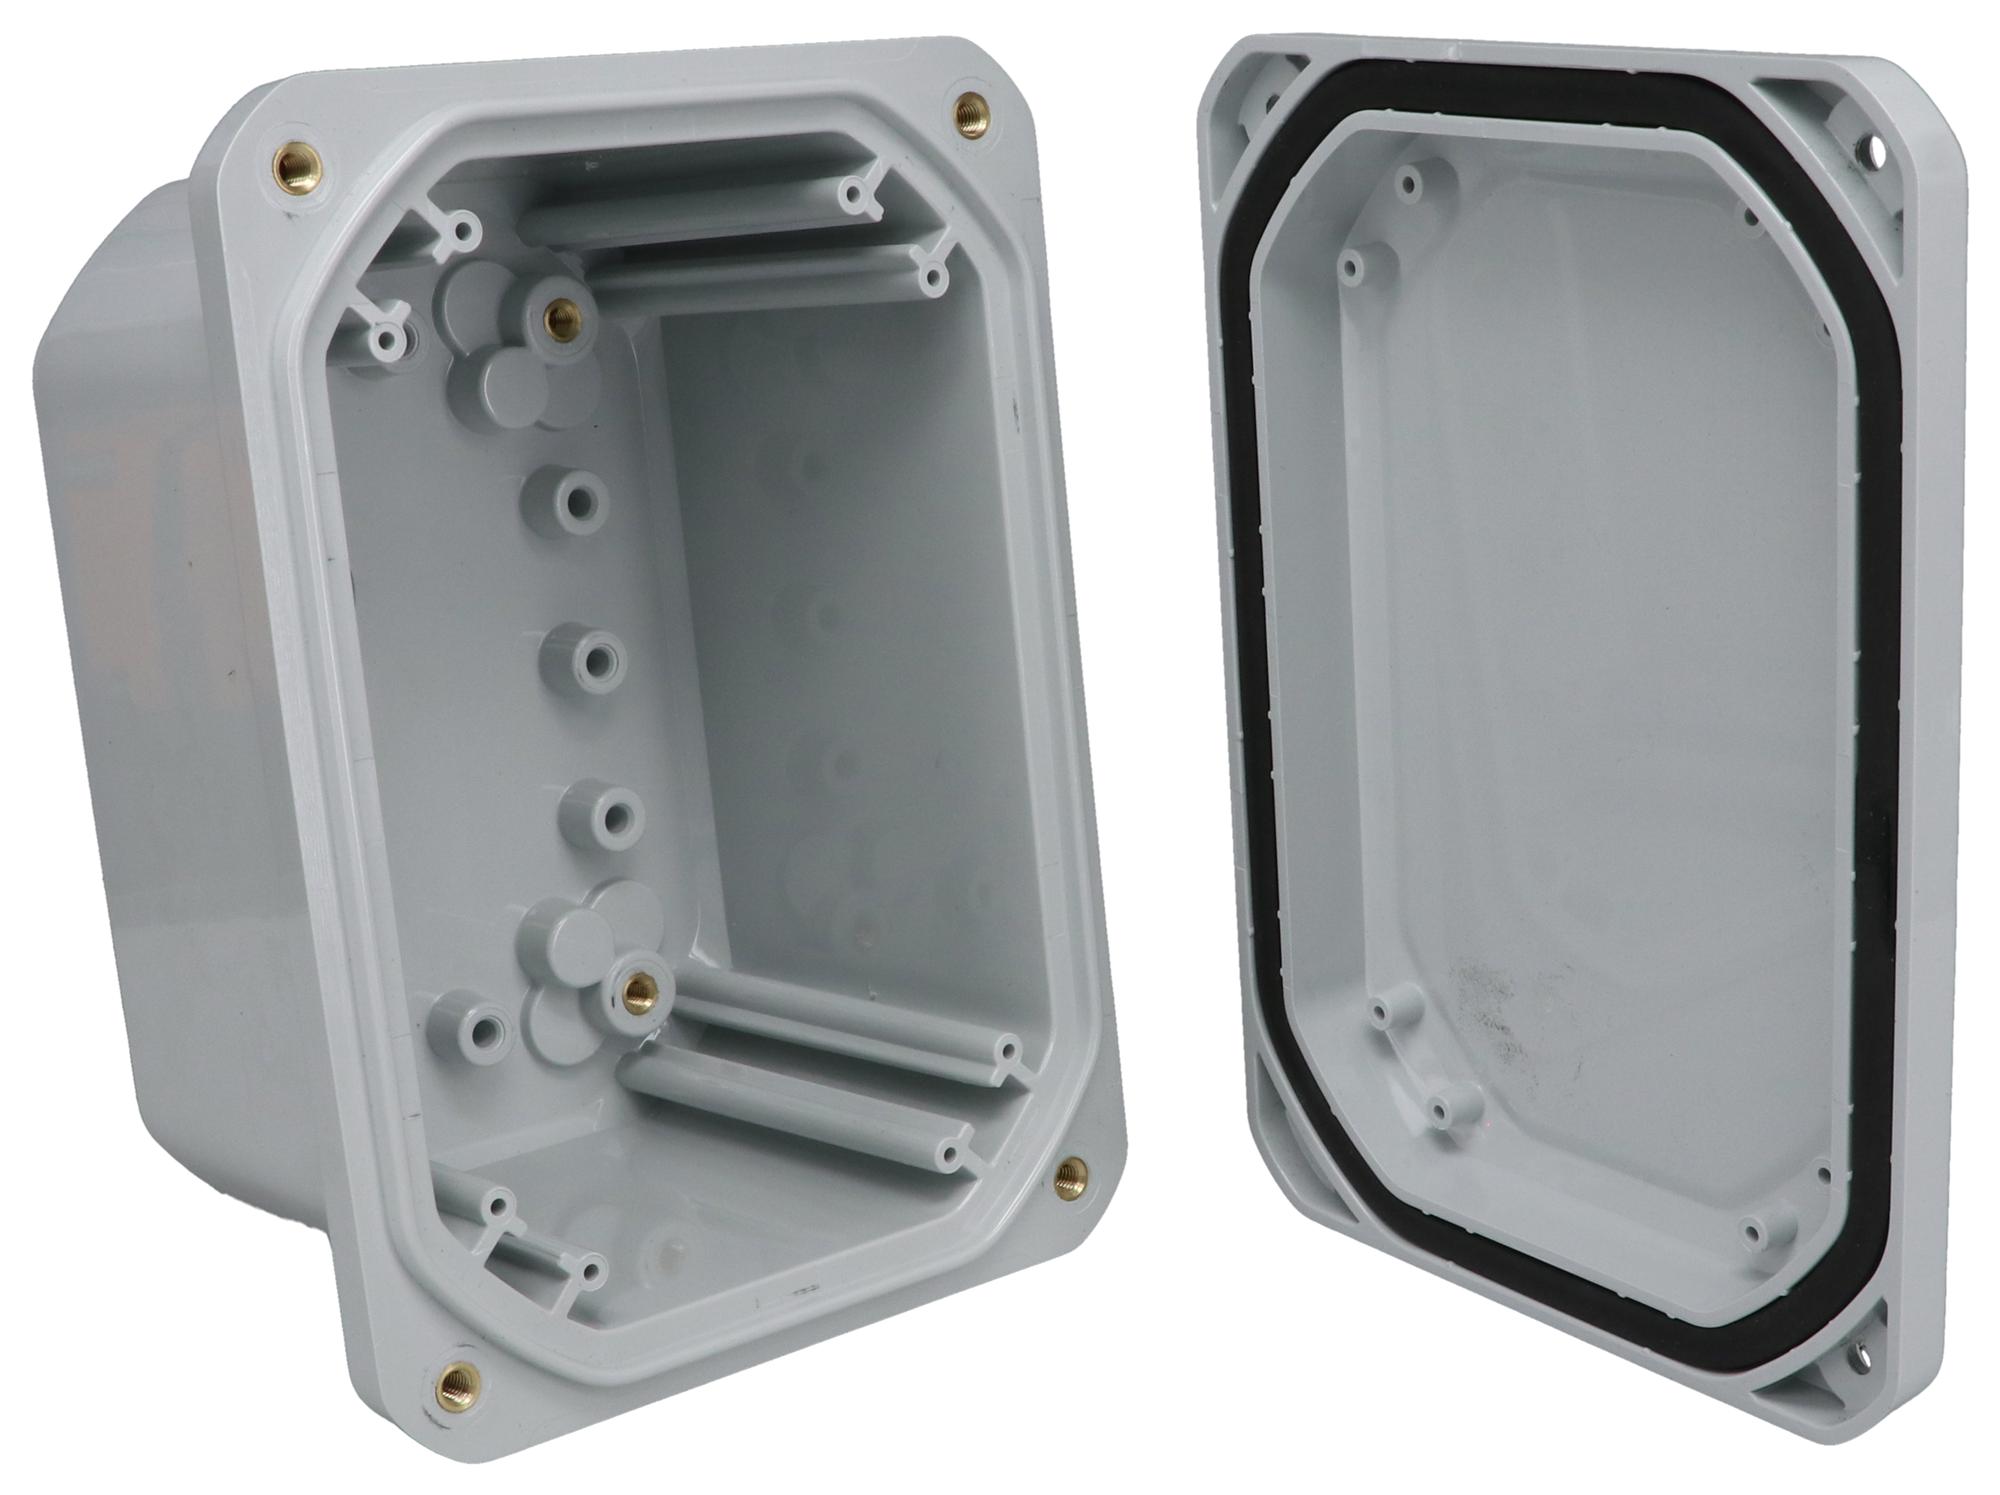 Bud Industries Dps-28706 Enclosure, Outdoor, Pc, Light Grey